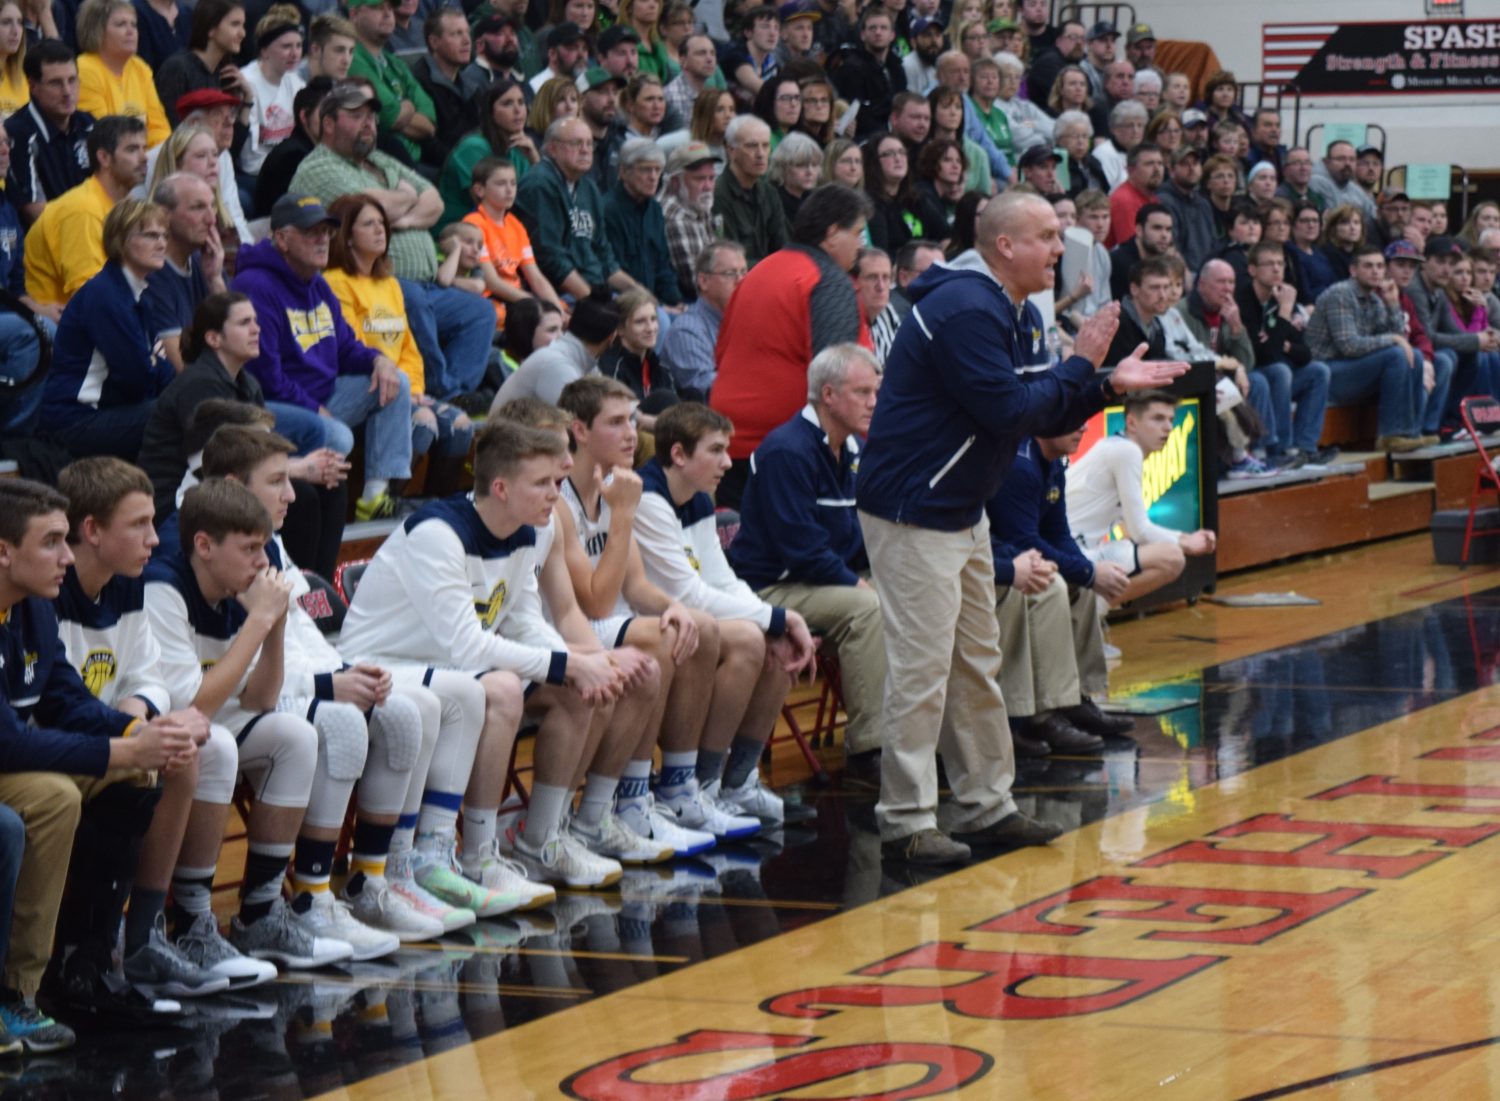 Columbus Catholic boys basketball coach Joe Konieczny, standing, calls out to his team during the Dons' 75-62 win over Almond-Bancroft in a WIAA Division 5 sectional semifinal at Stevens Point Area Senior High on March 9.